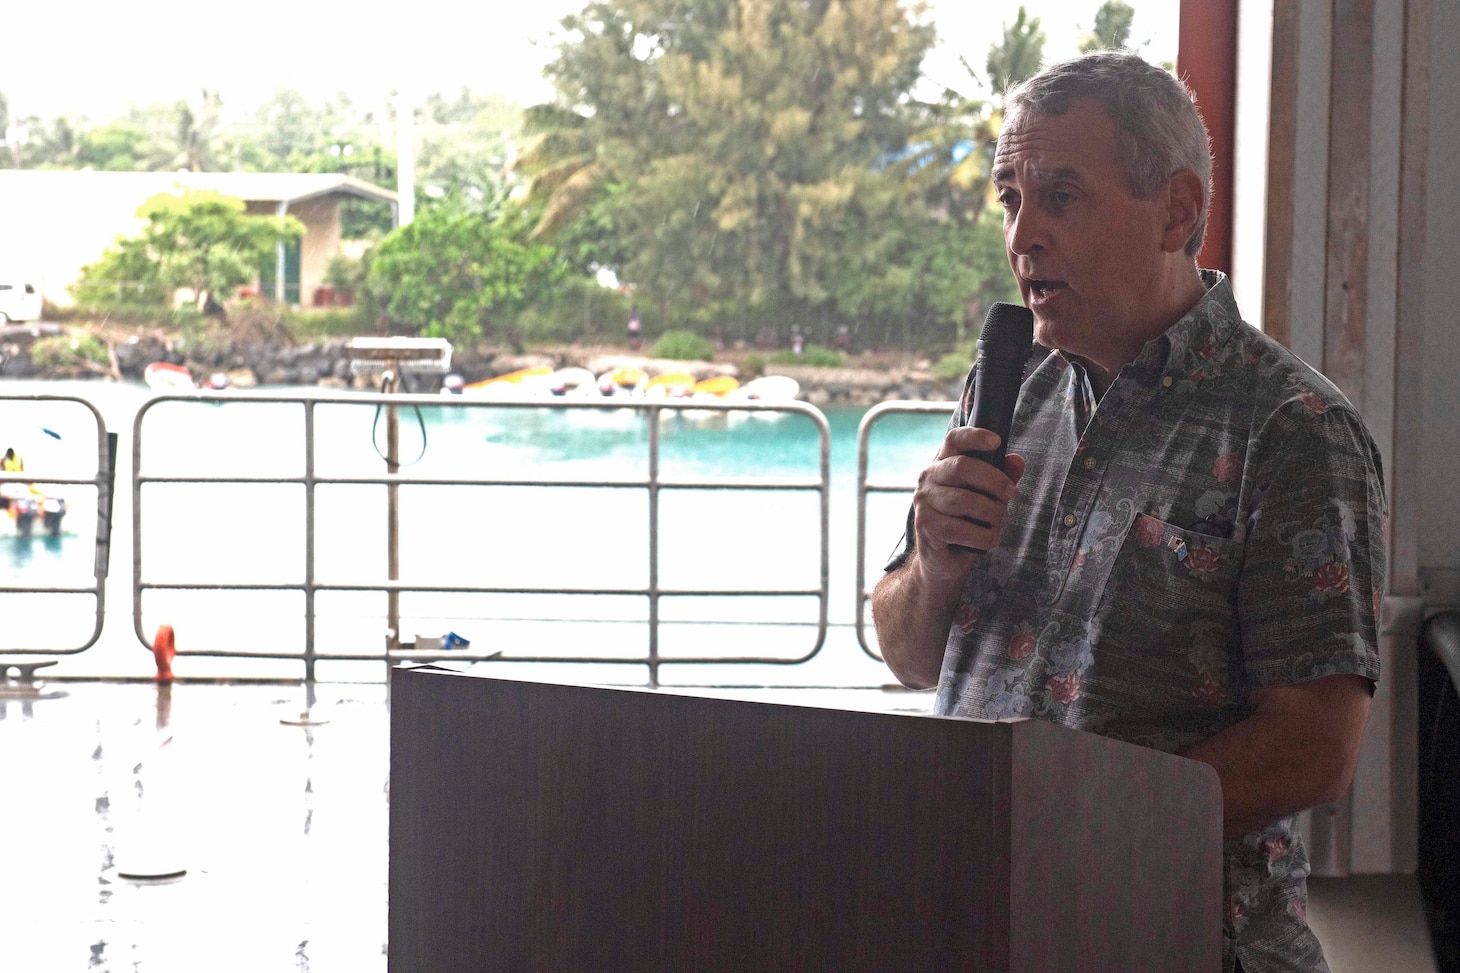 CHUUK, Federated States of Micronesia (April 25, 2019) The Honorable Robert Riley, U.S. Ambassador to the Federated States of Micronesia, gives remarks at the closing ceremony aboard the Military Sealift Command expeditionary fast transport ship USNS Brunswick (T-EPF 6), strengthening strategic partnerships during Pacific Partnership 2019. Pacific Partnership, now in its 14th iteration, is the largest annual multinational humanitarian assistance and disaster relief preparedness mission conducted in the Indo-Pacific.